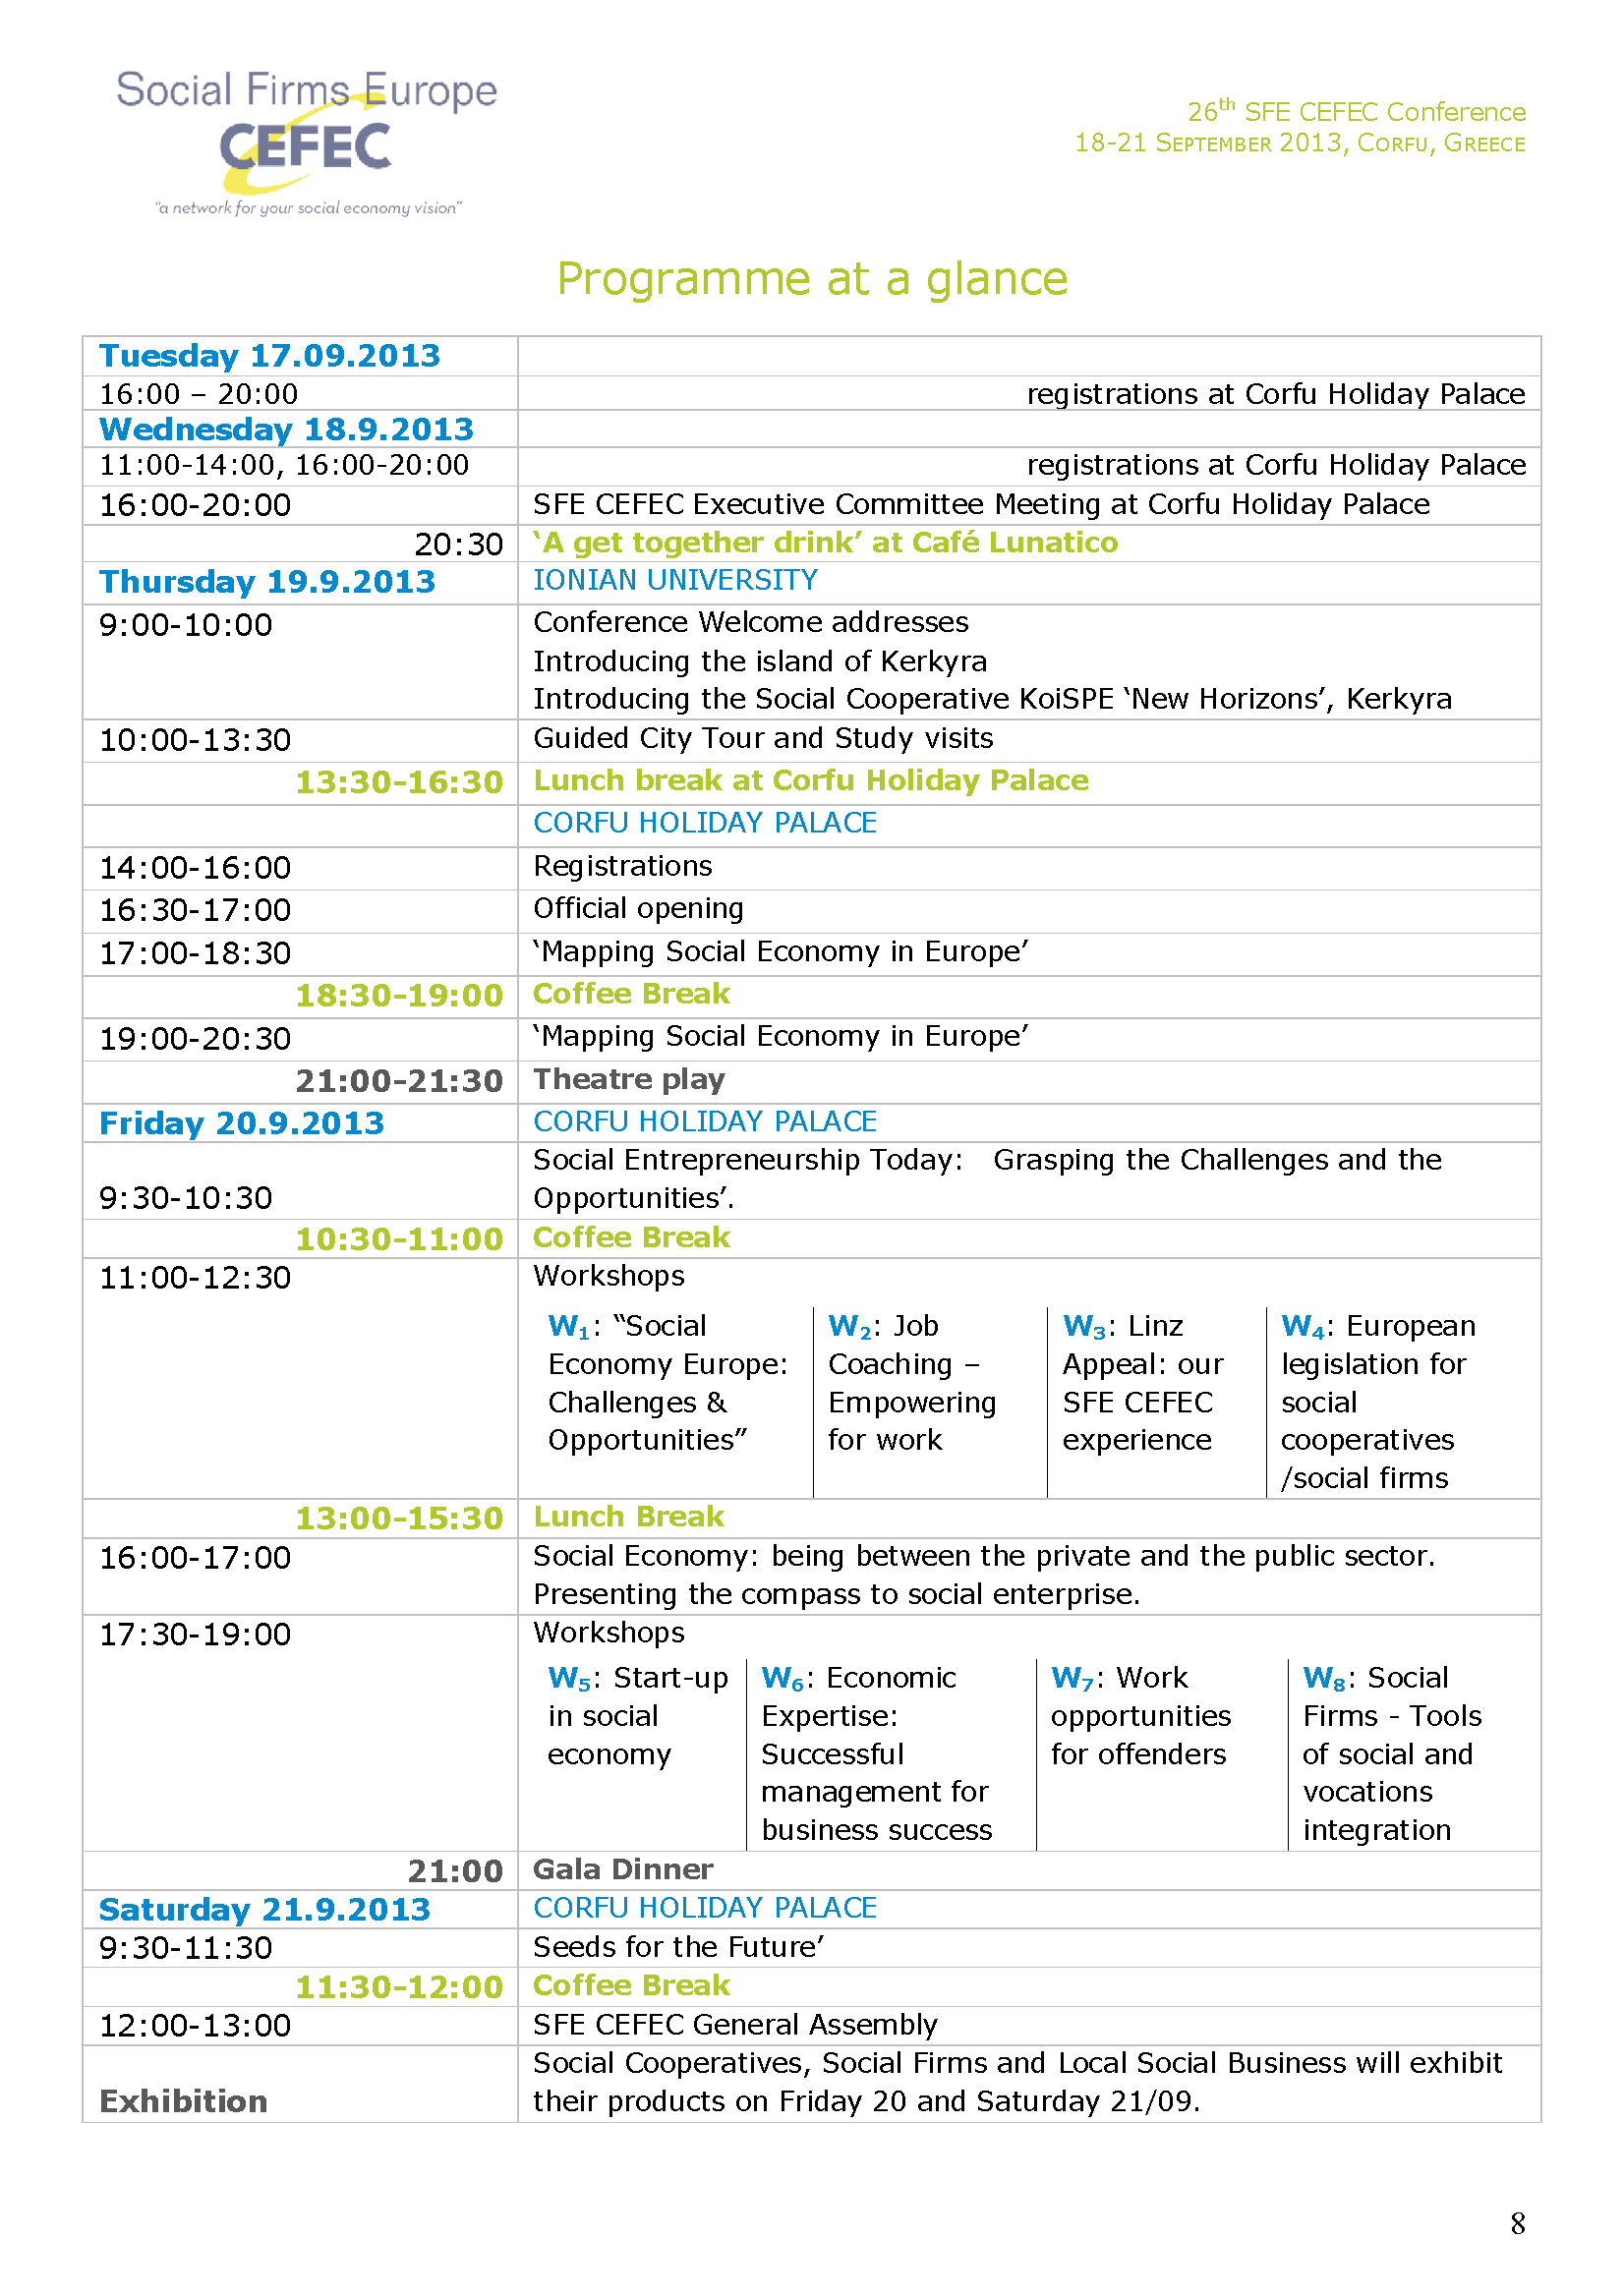 Programme at a Glance